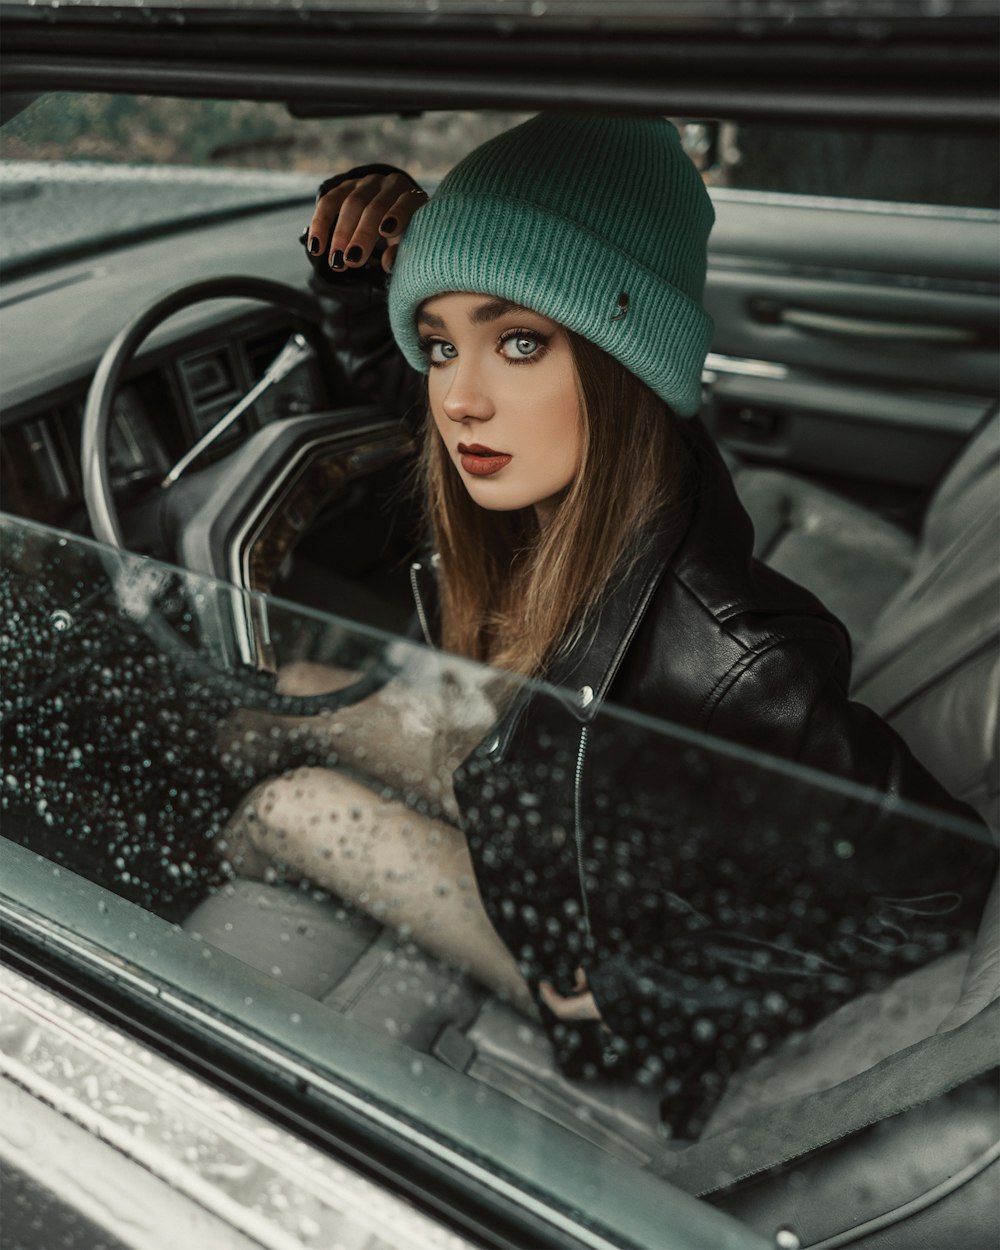 woman in black leather jacket and green knit cap sitting on car